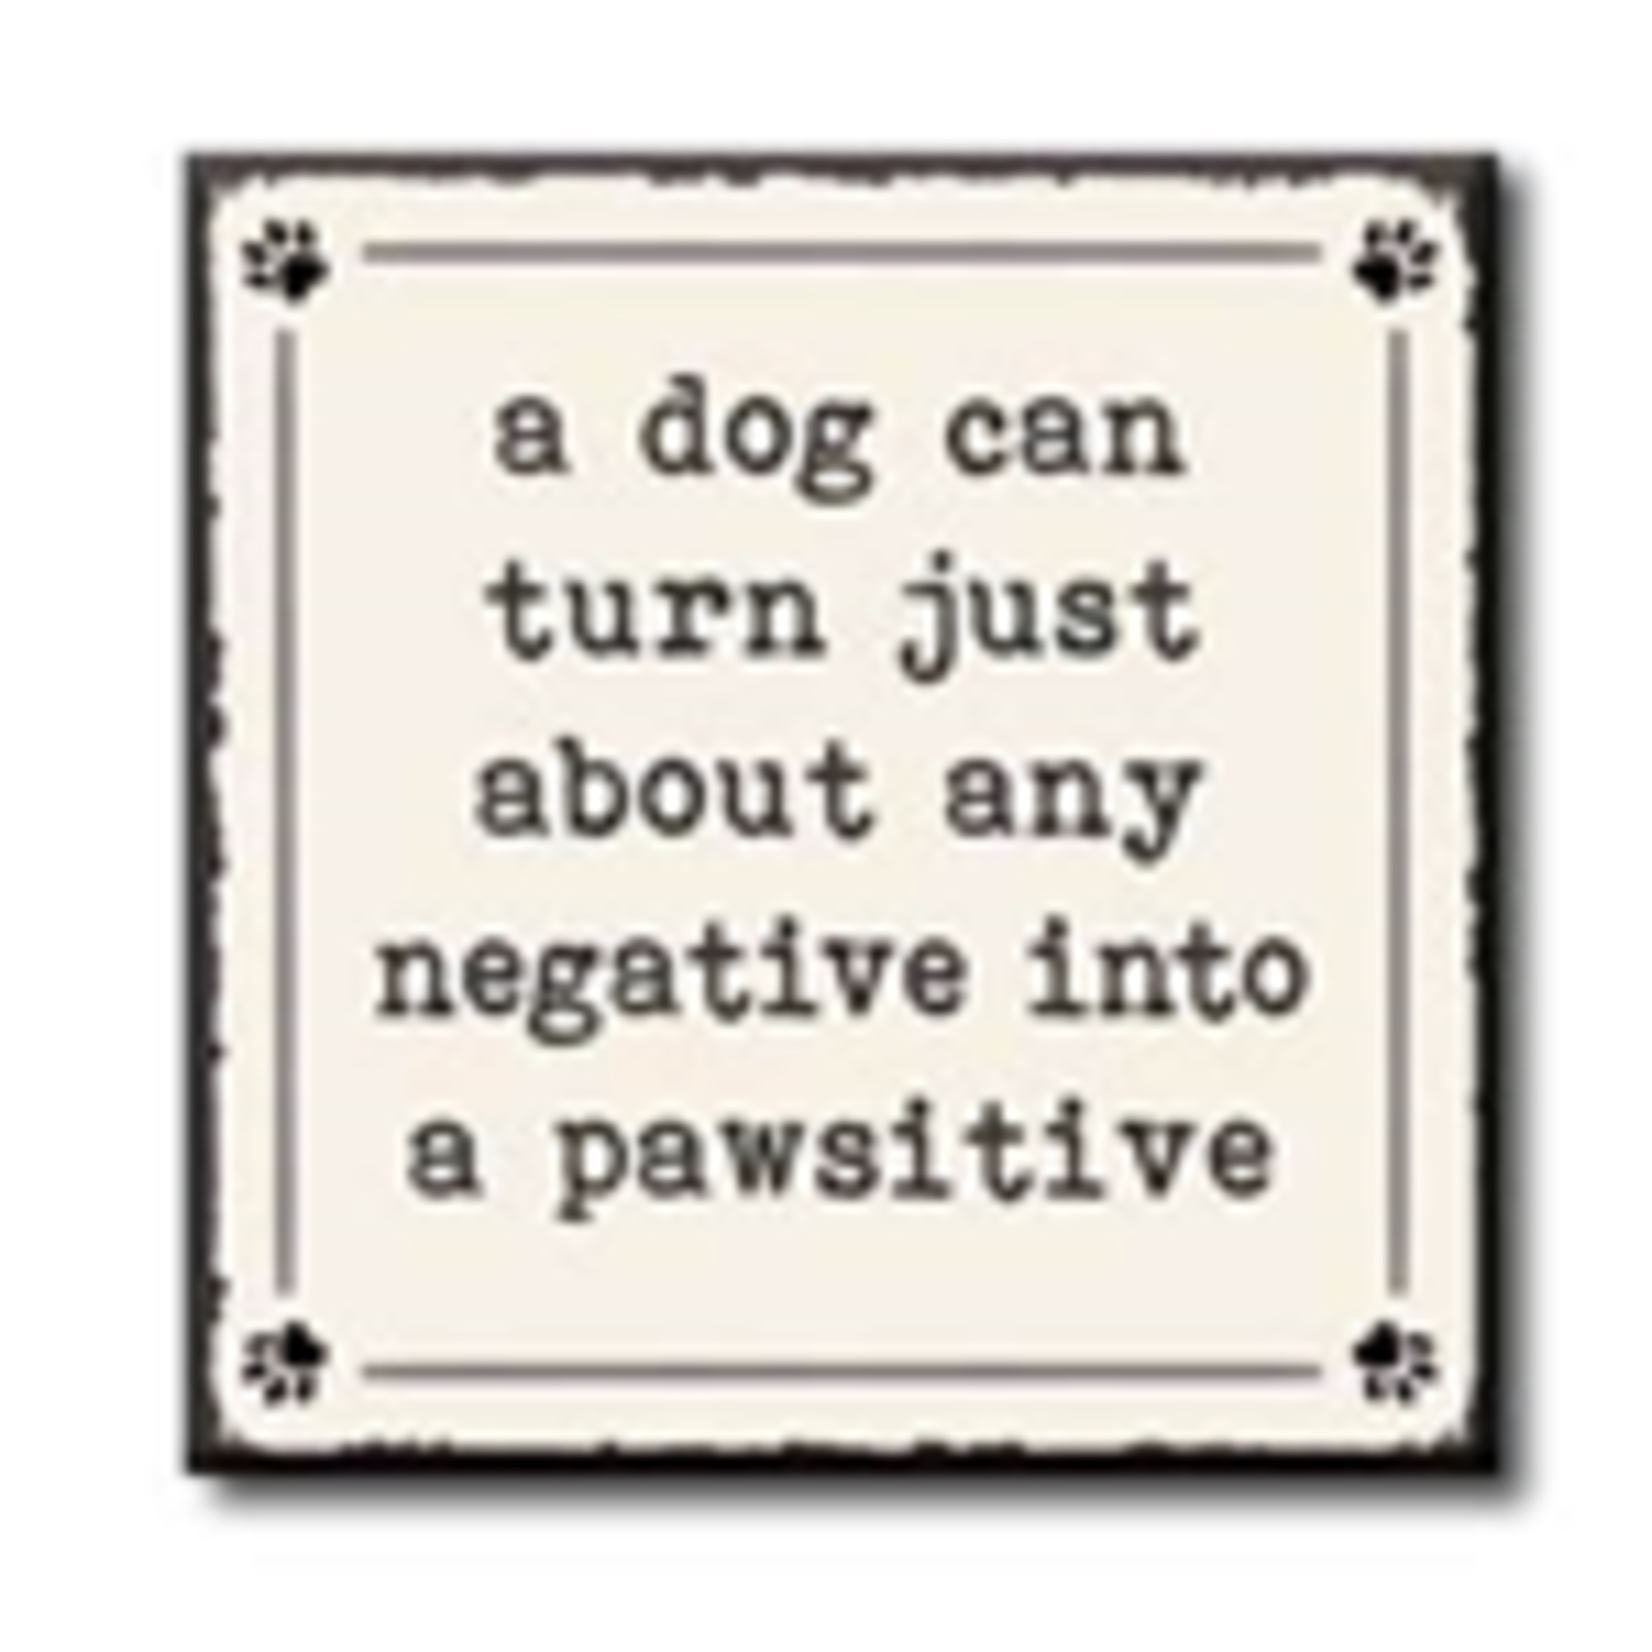 A Dog Can Turn Just About Any Negative into a Pawsitive 4x4